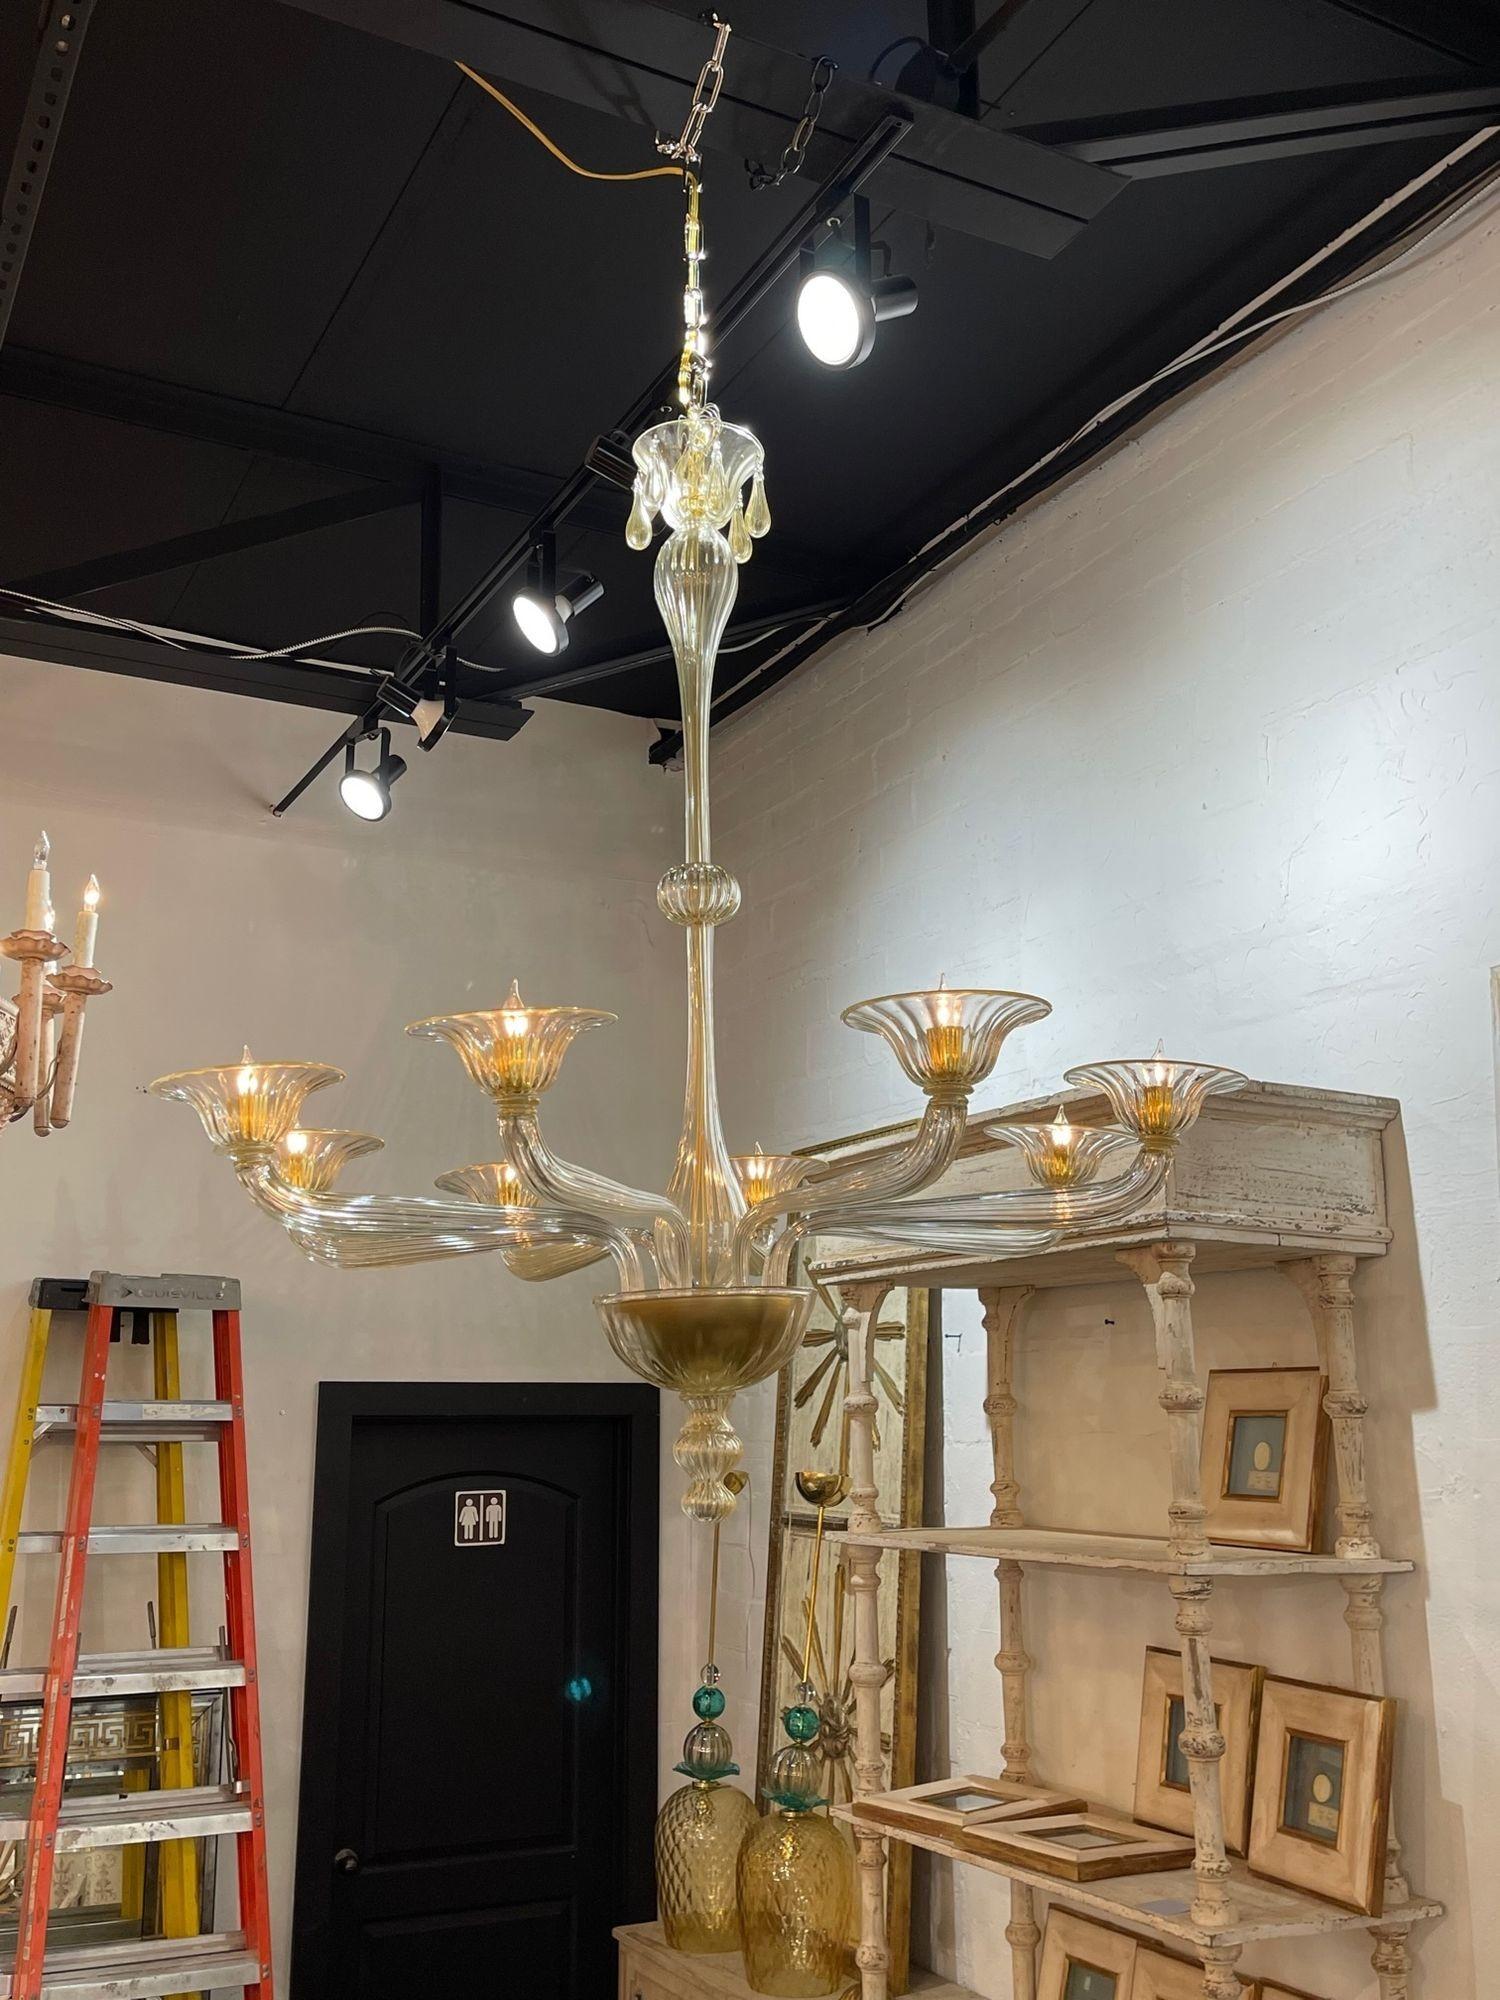 Stylish modern Murano glass chandelier with 8 lights. Featuring beautiful glistening gold glass and decorative arms and base. Makes an impressive statement!.